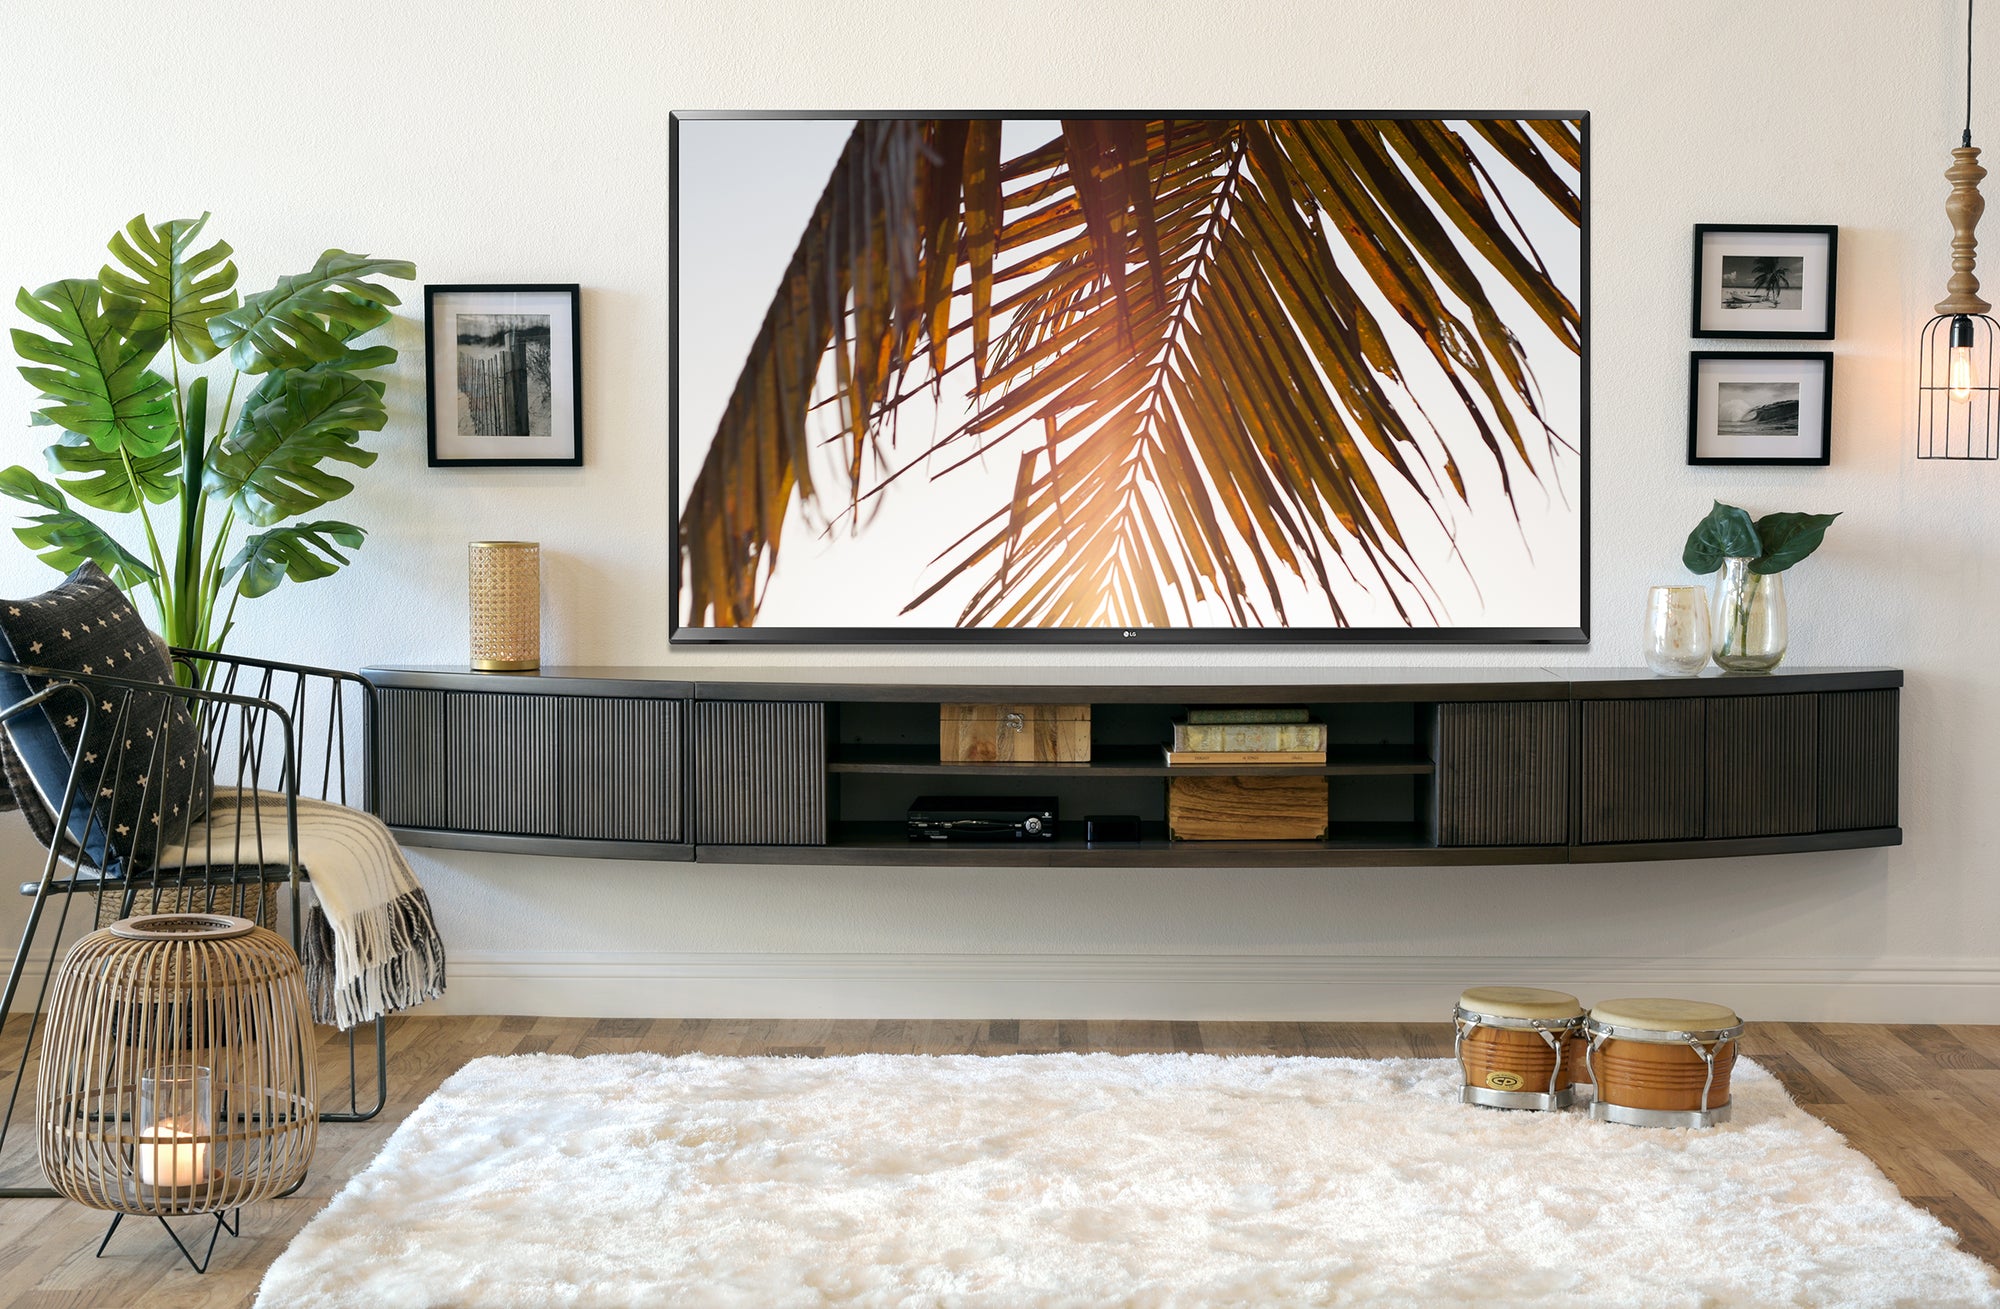 Hide Cables: 8 DIY Steps for a Sleek Wall-Mounted TV Space